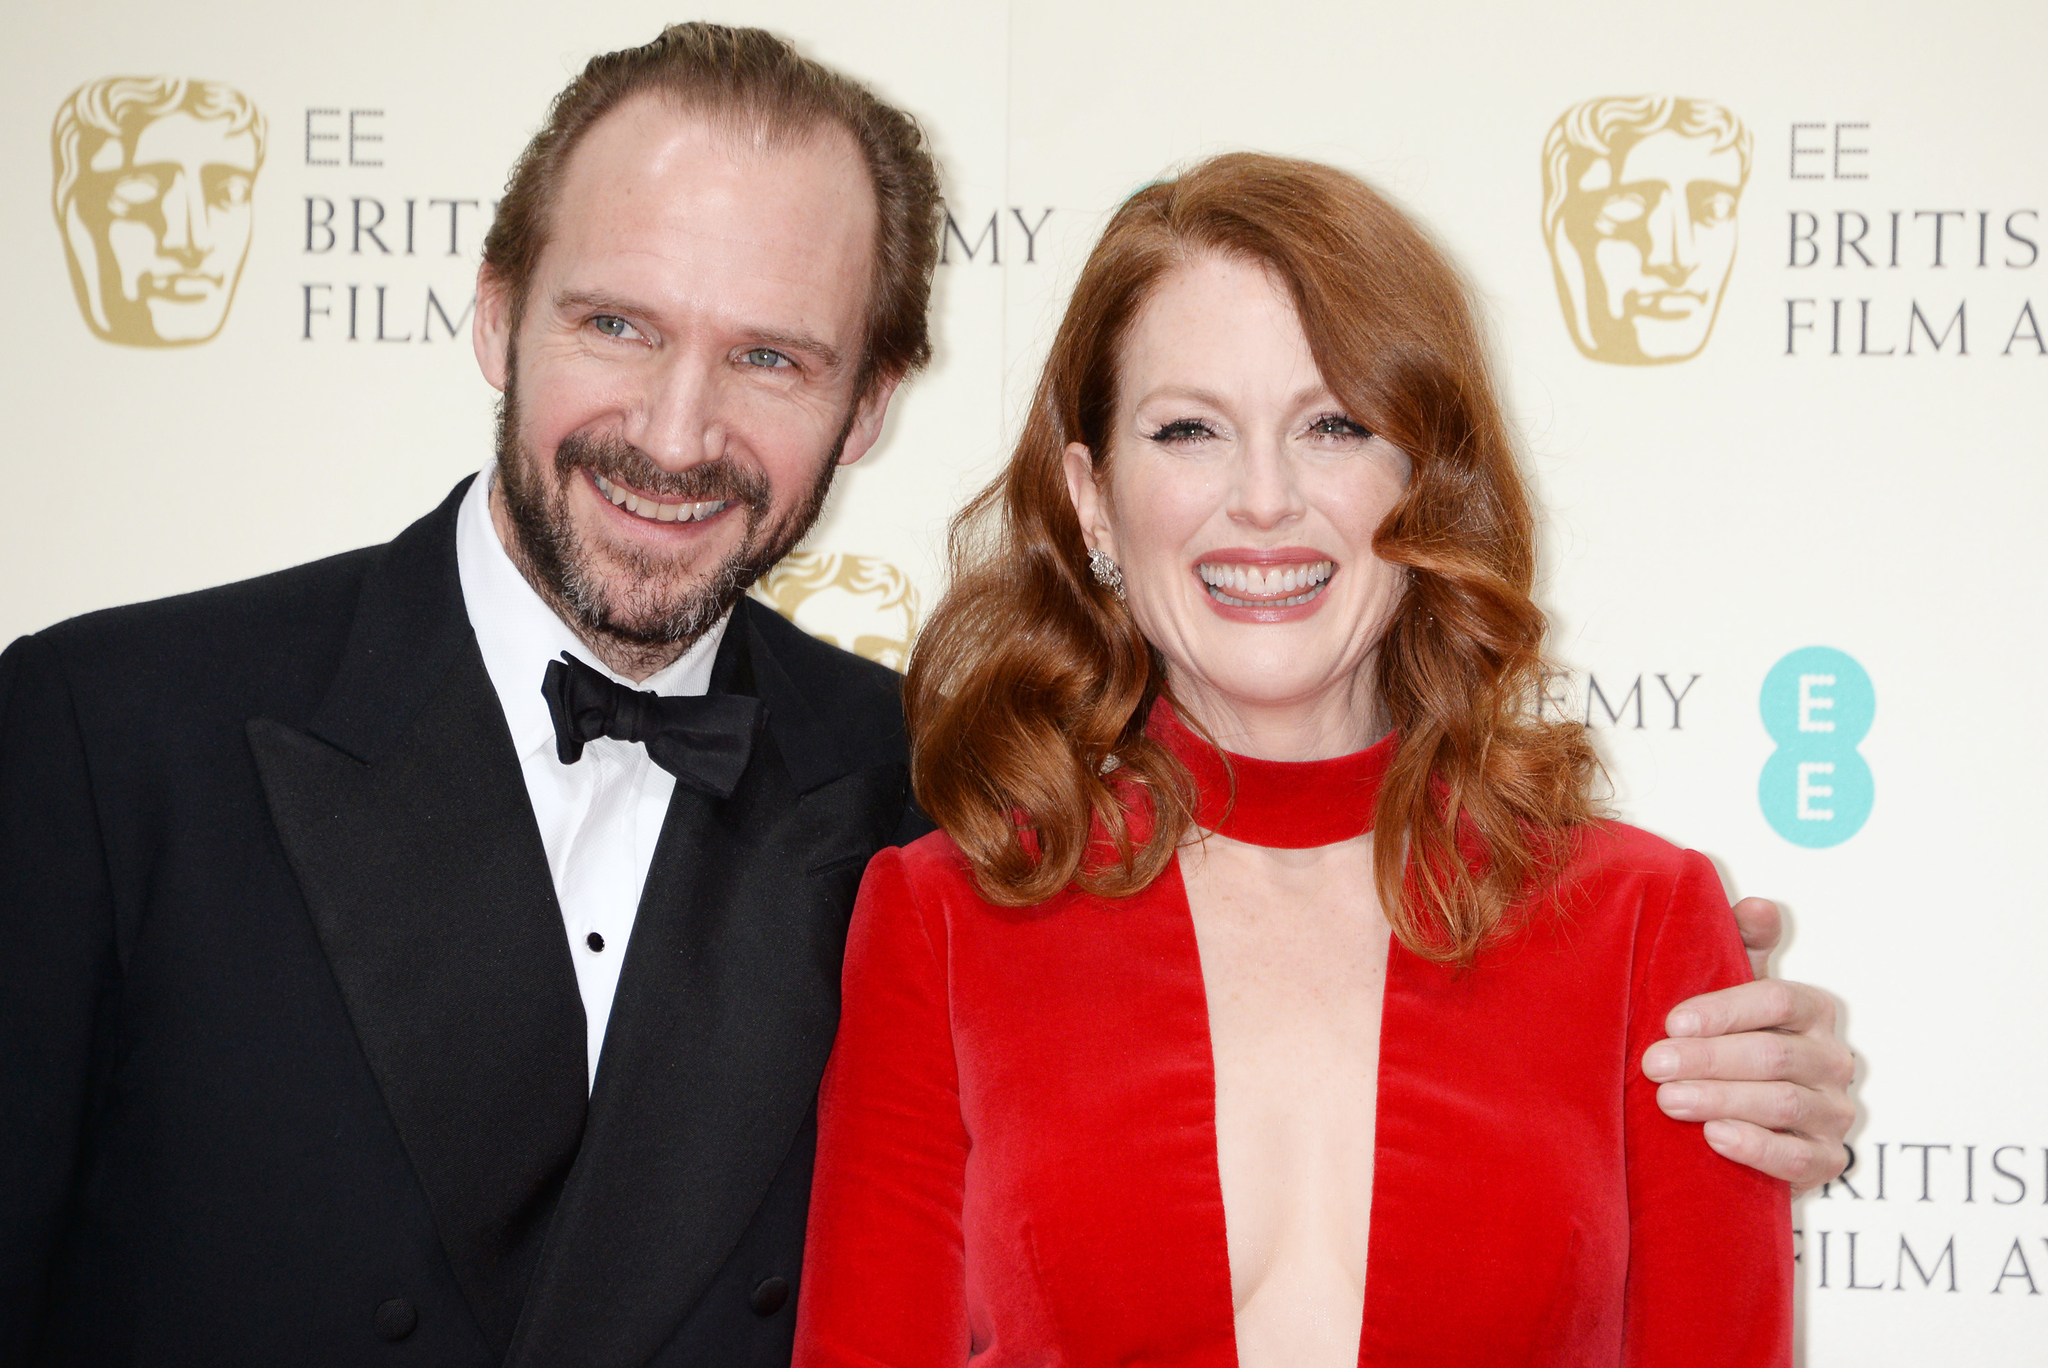 Ralph Fiennes and Julianne Moore